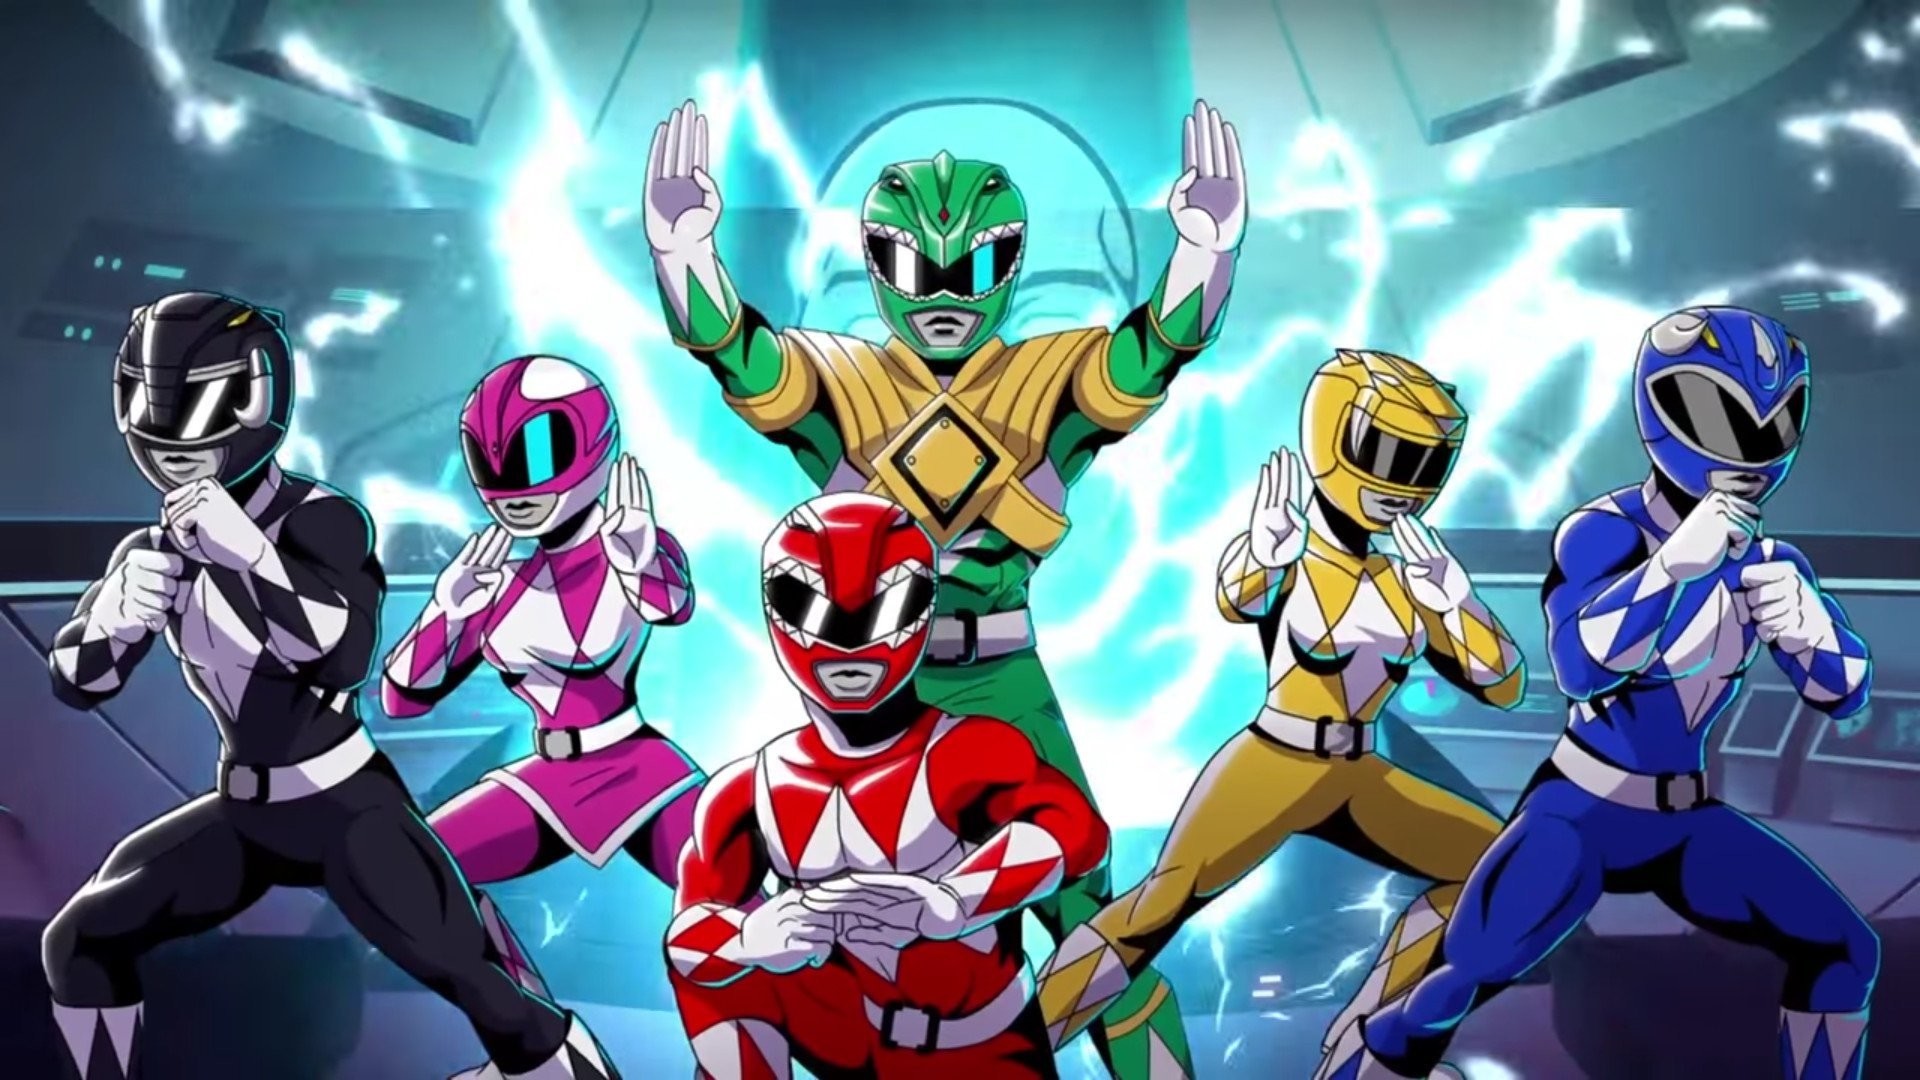 HD Wallpaper Background ID781416. Video Game Mighty Morphin Power Rangers